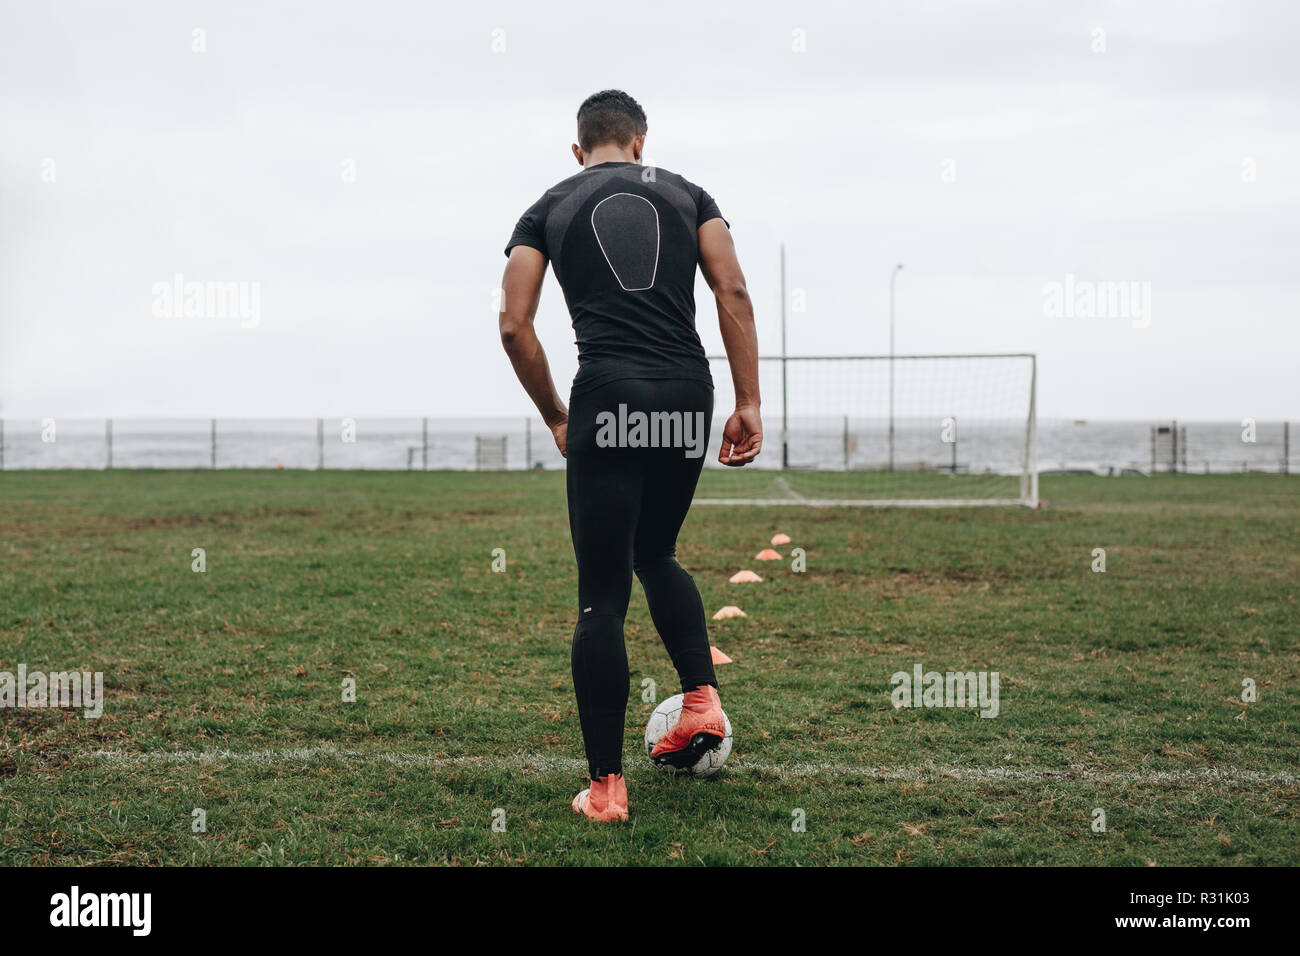 Rear view of a soccer player practicing dribbling with the help of cones arranged on field. Football player practicing on field early in the morning. Stock Photo